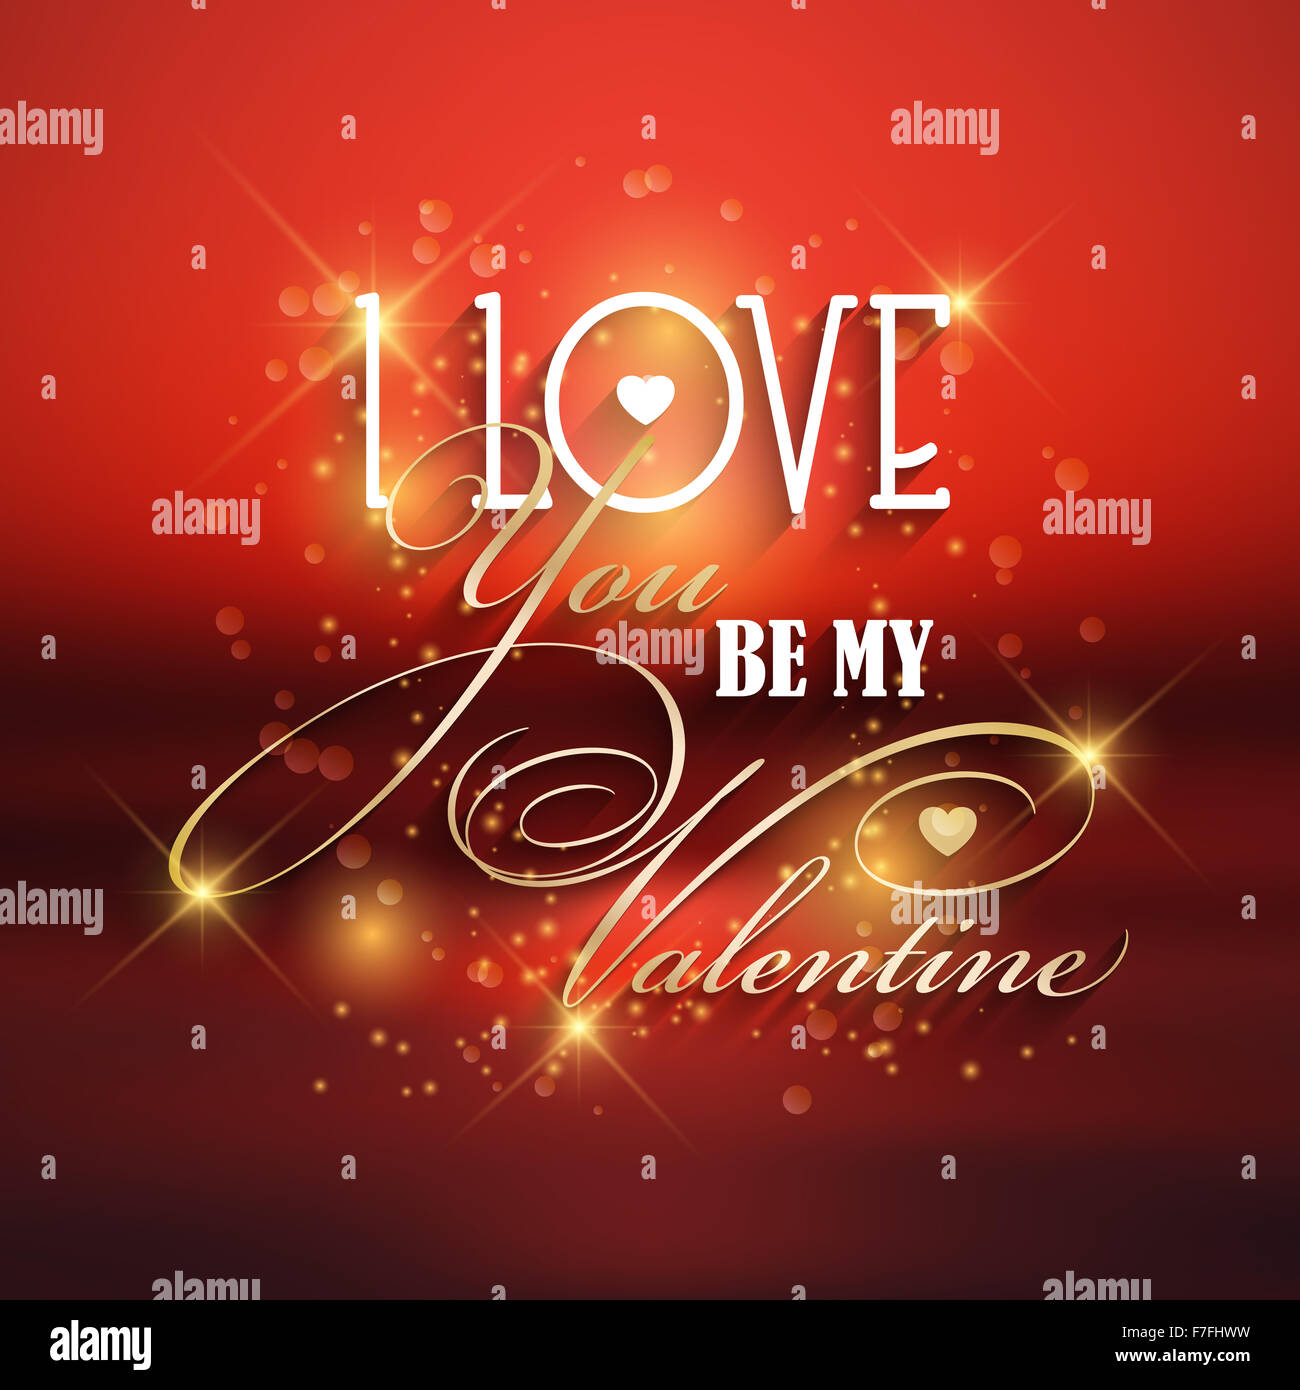 Valentine's day background with typography design Stock Photo